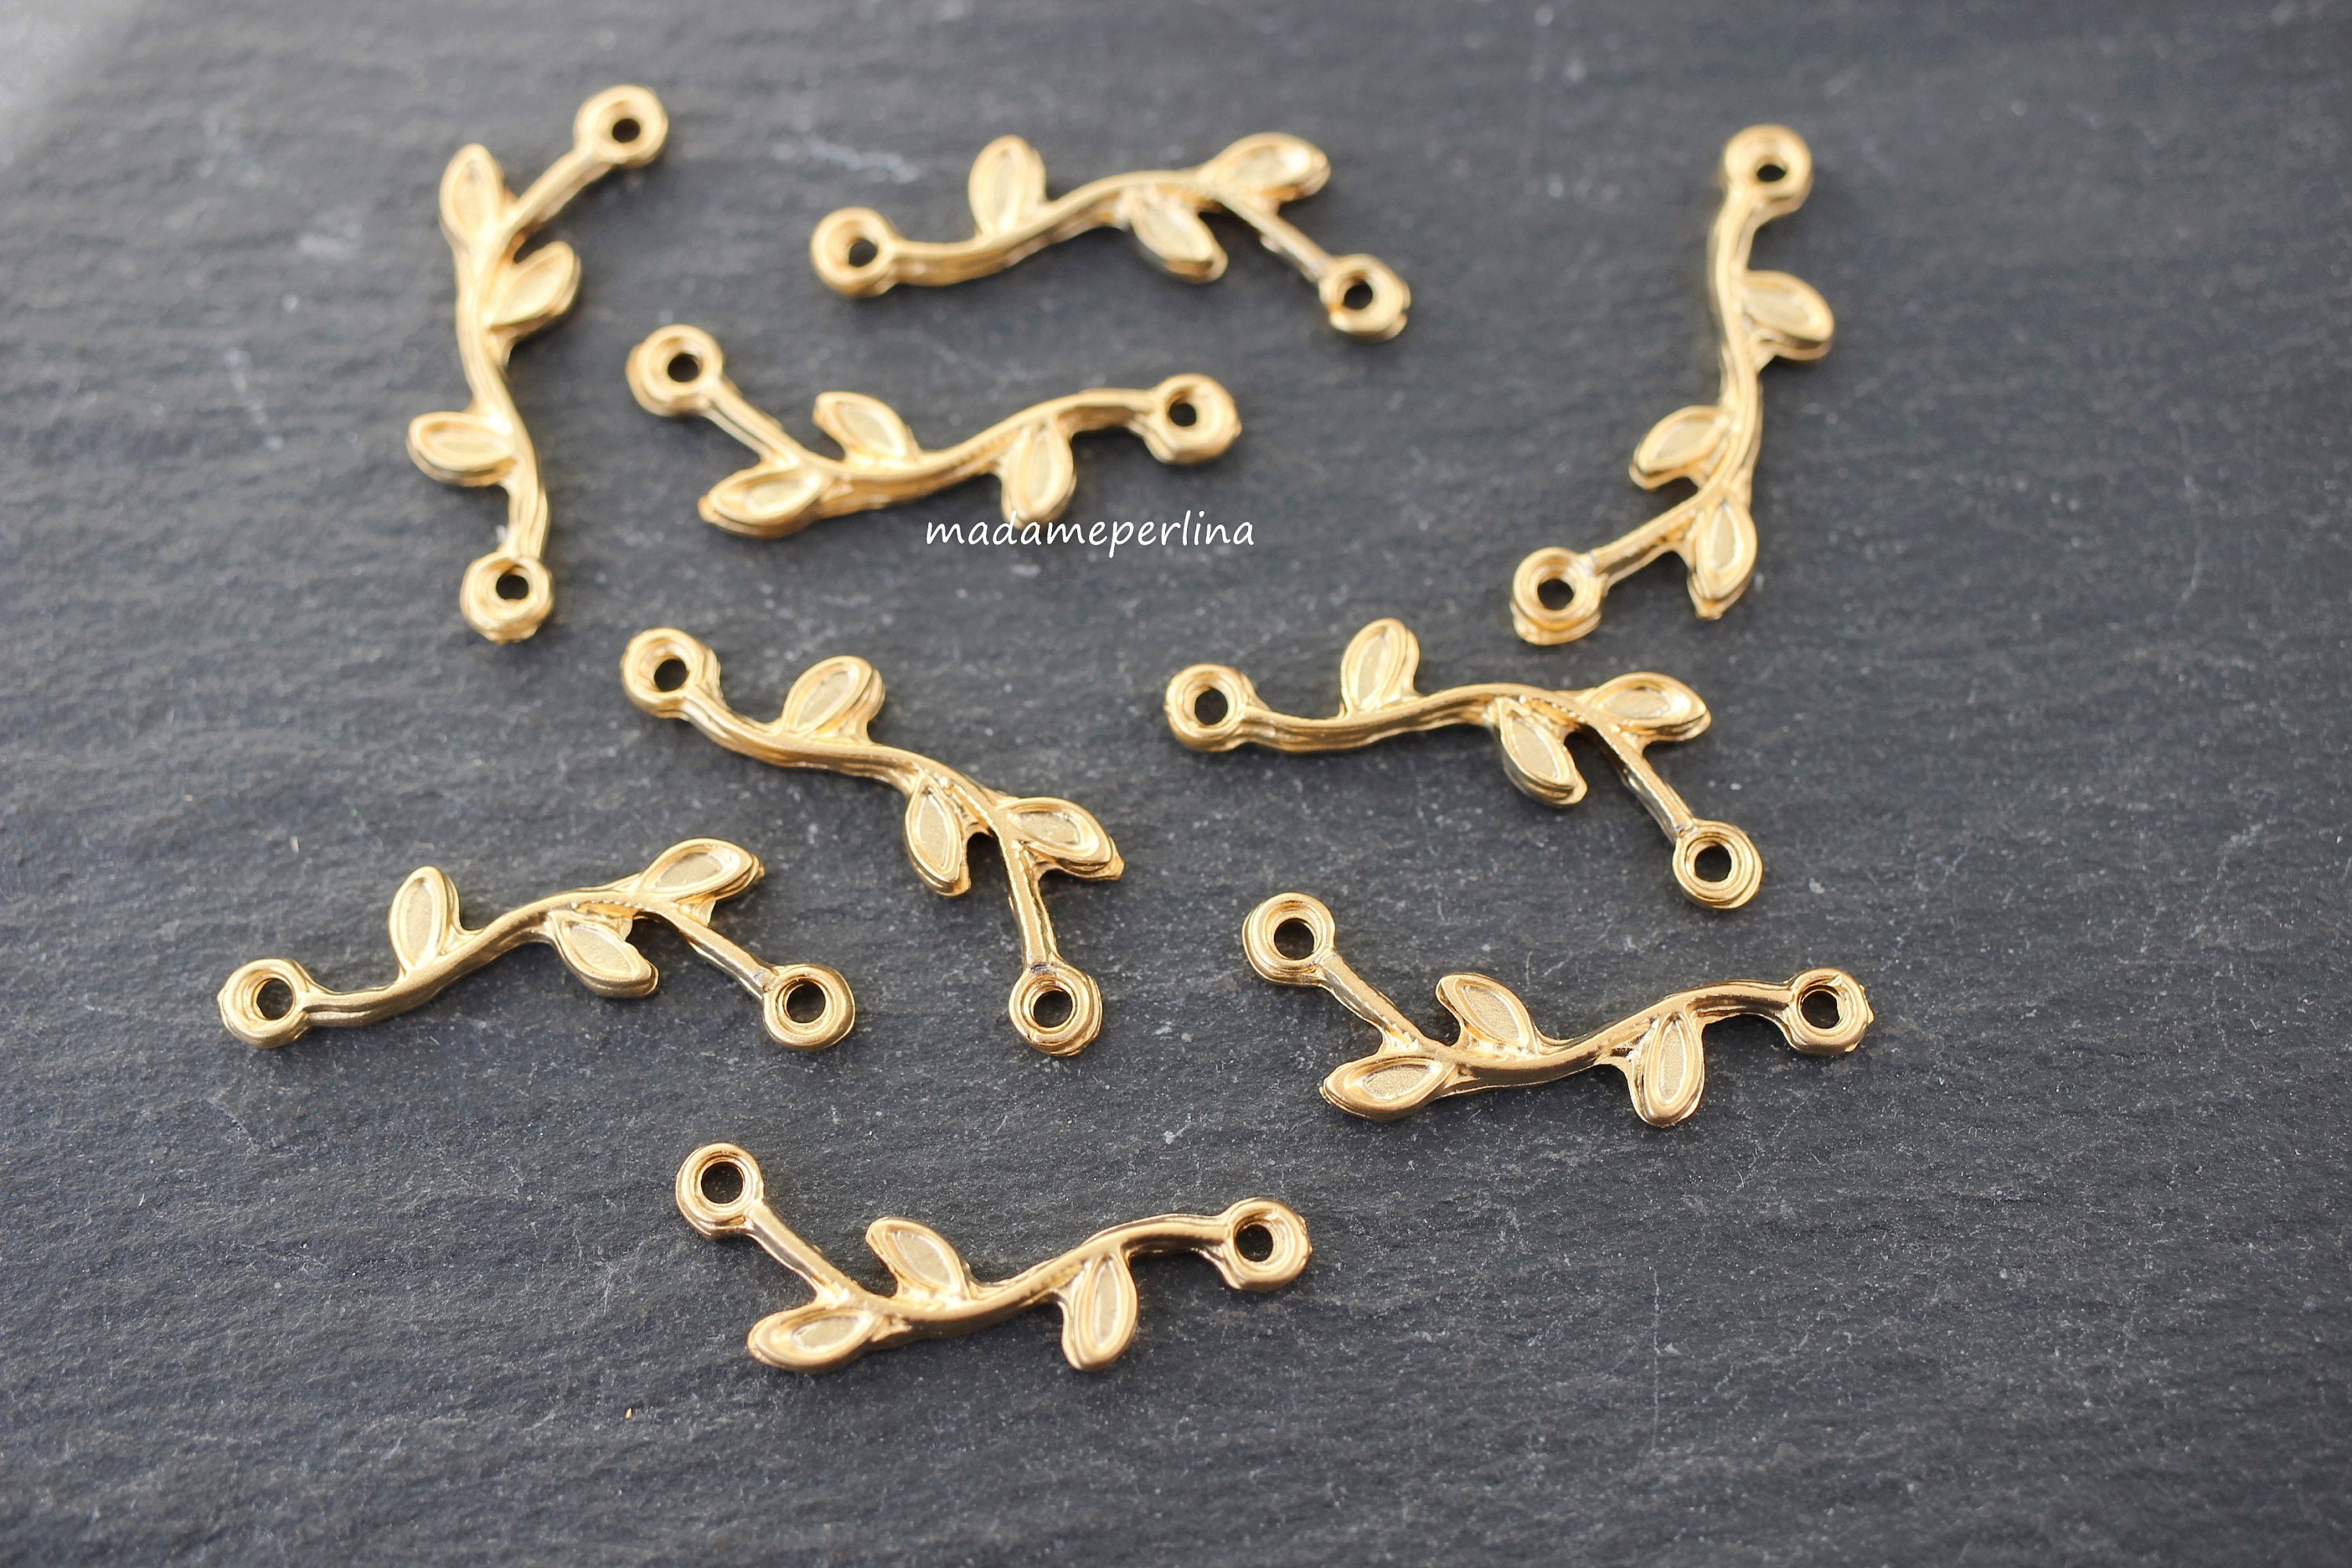 10 Leaf Connectors Links 24K Matte Gold plated charms 12mm Turkish Jewelry  supply mdla1061A